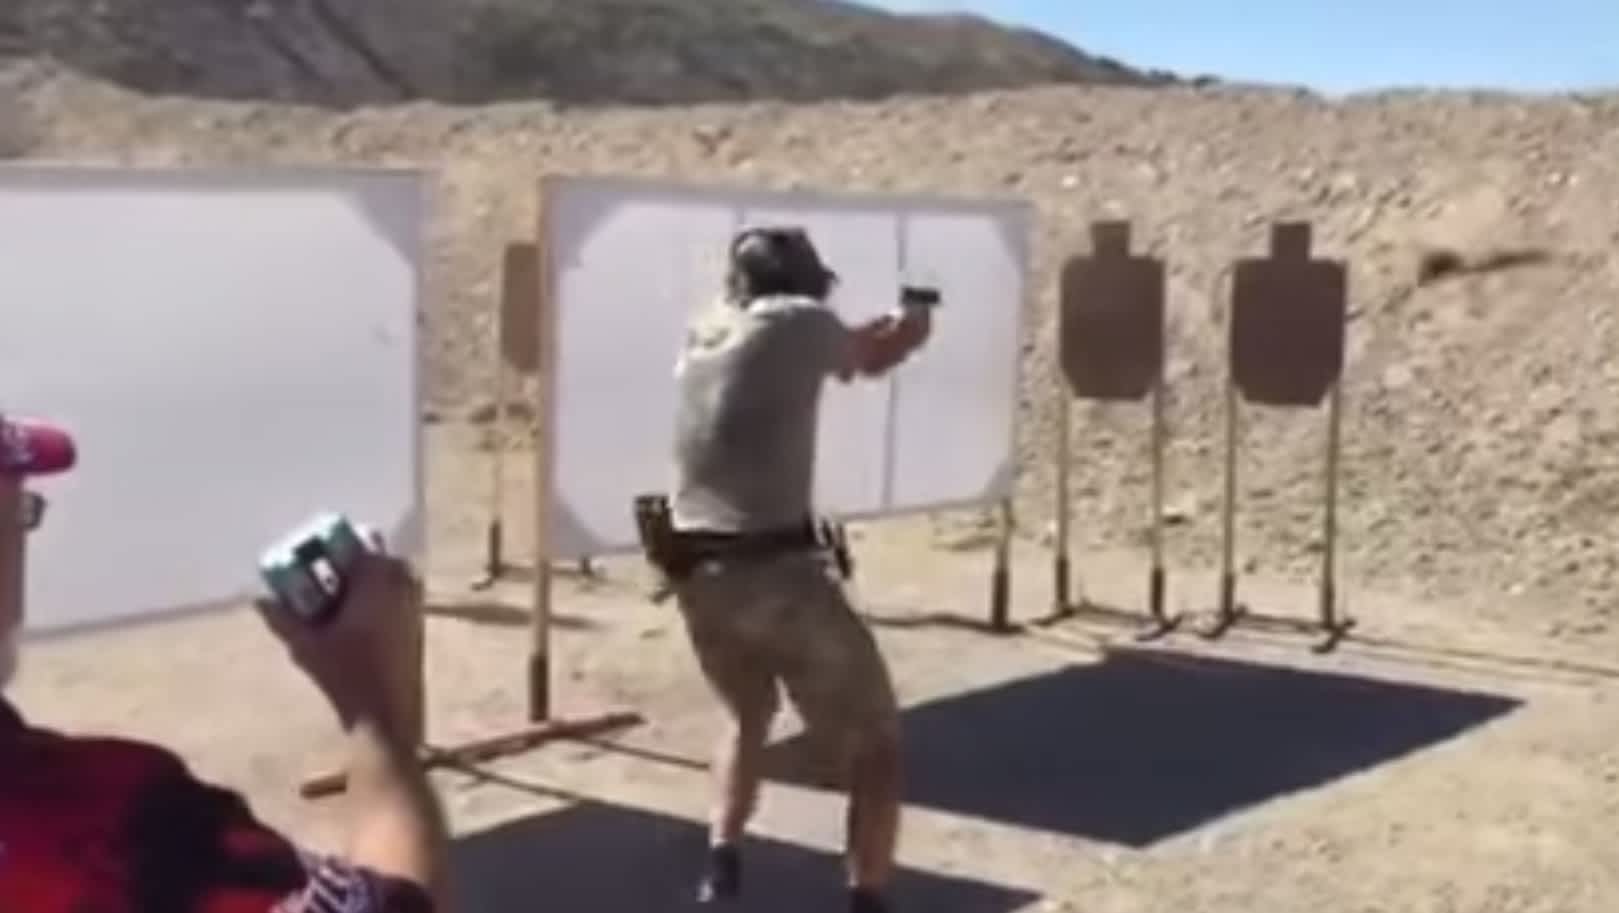 Video: This is Why You Should Always Make Sure the Range is Clear Before You Shoot